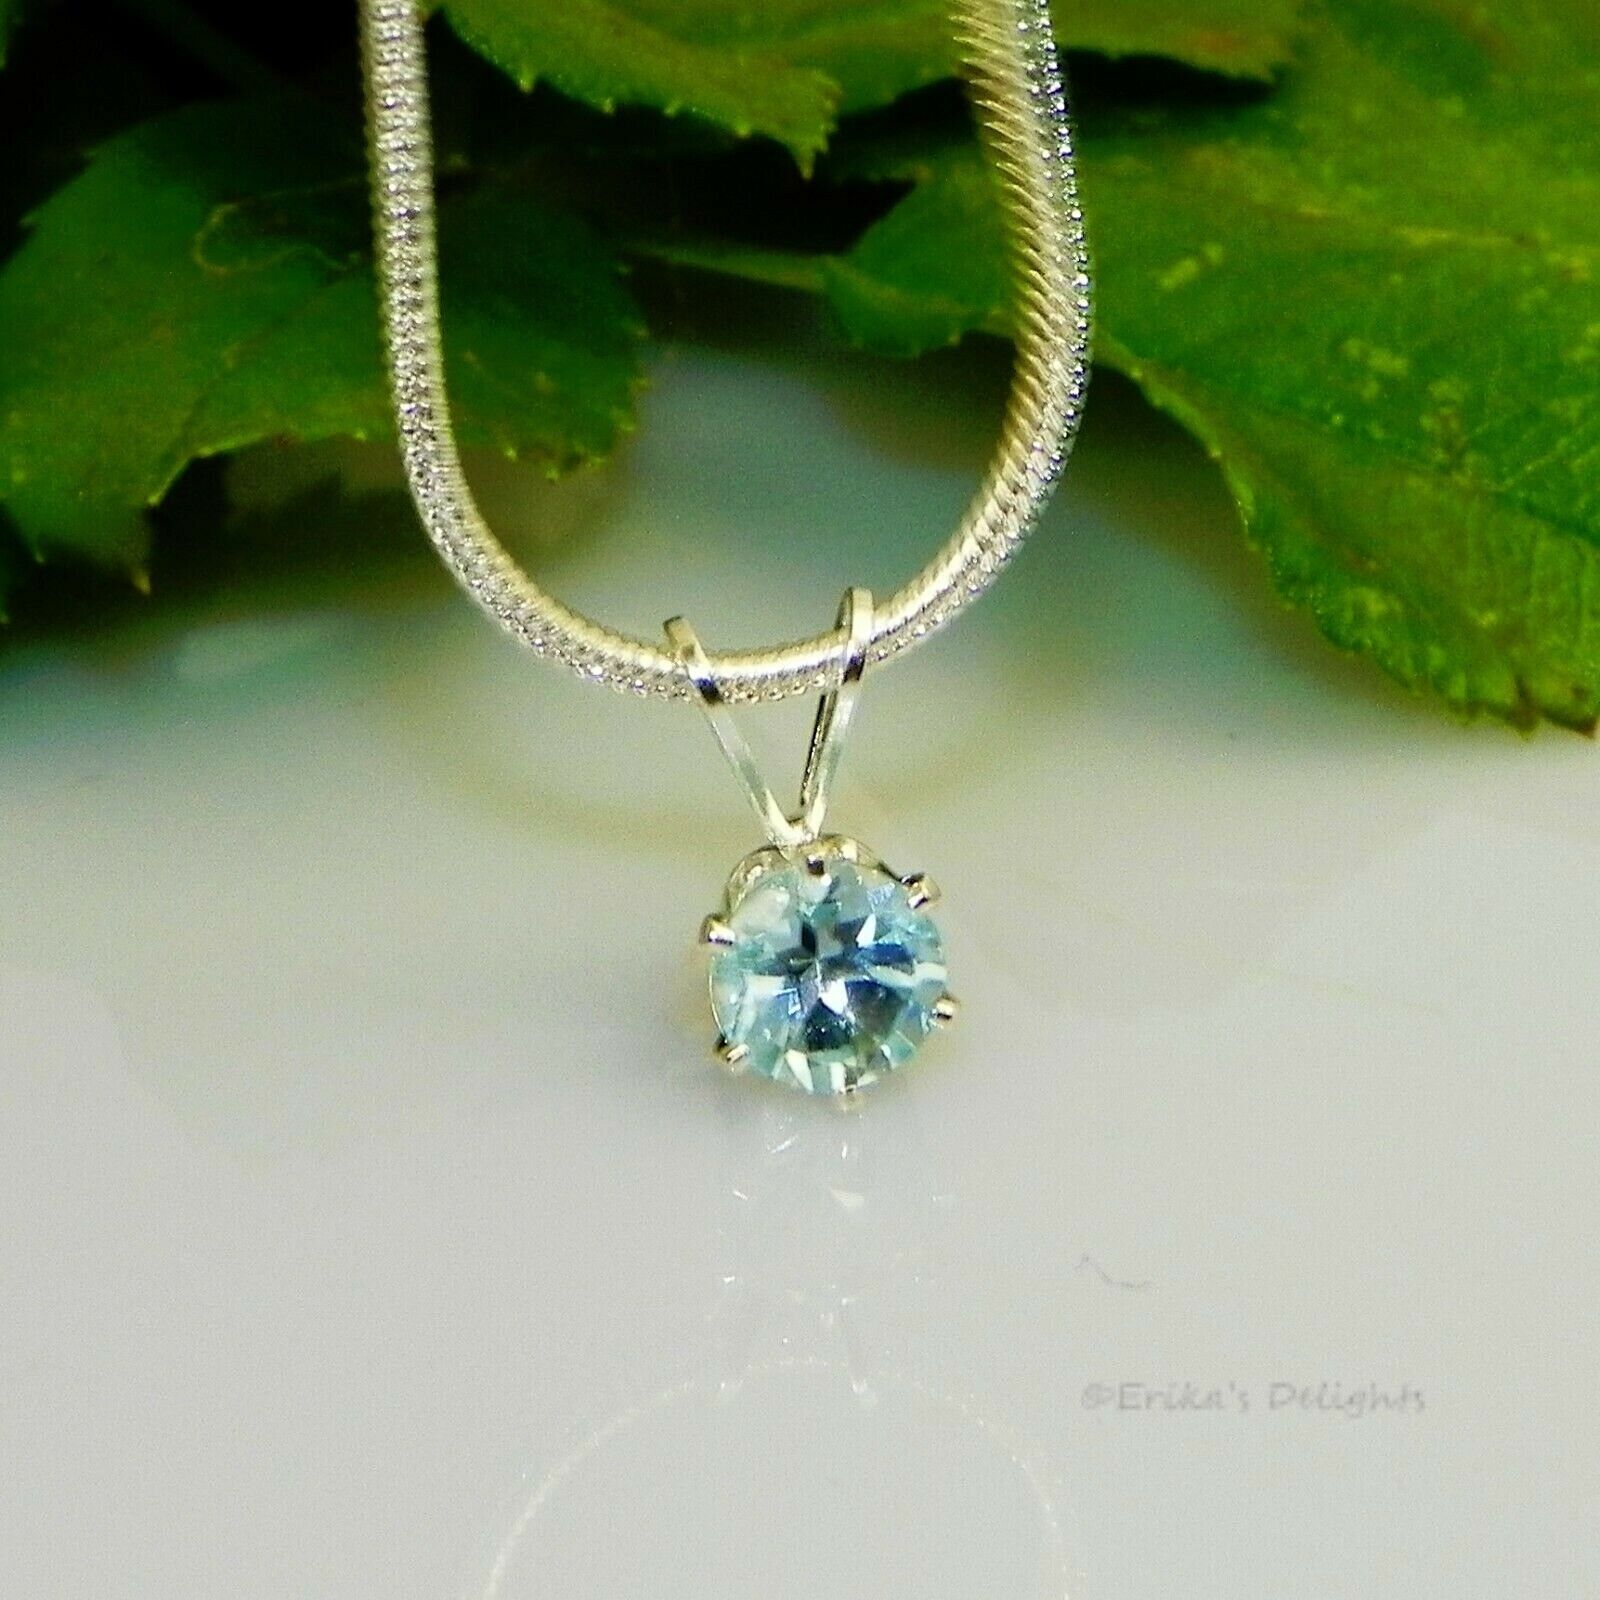 Sky Blue Topaz Sterling Silver Pendant  w/ Snake Chain Necklace "Handmade by Erika's Delights"